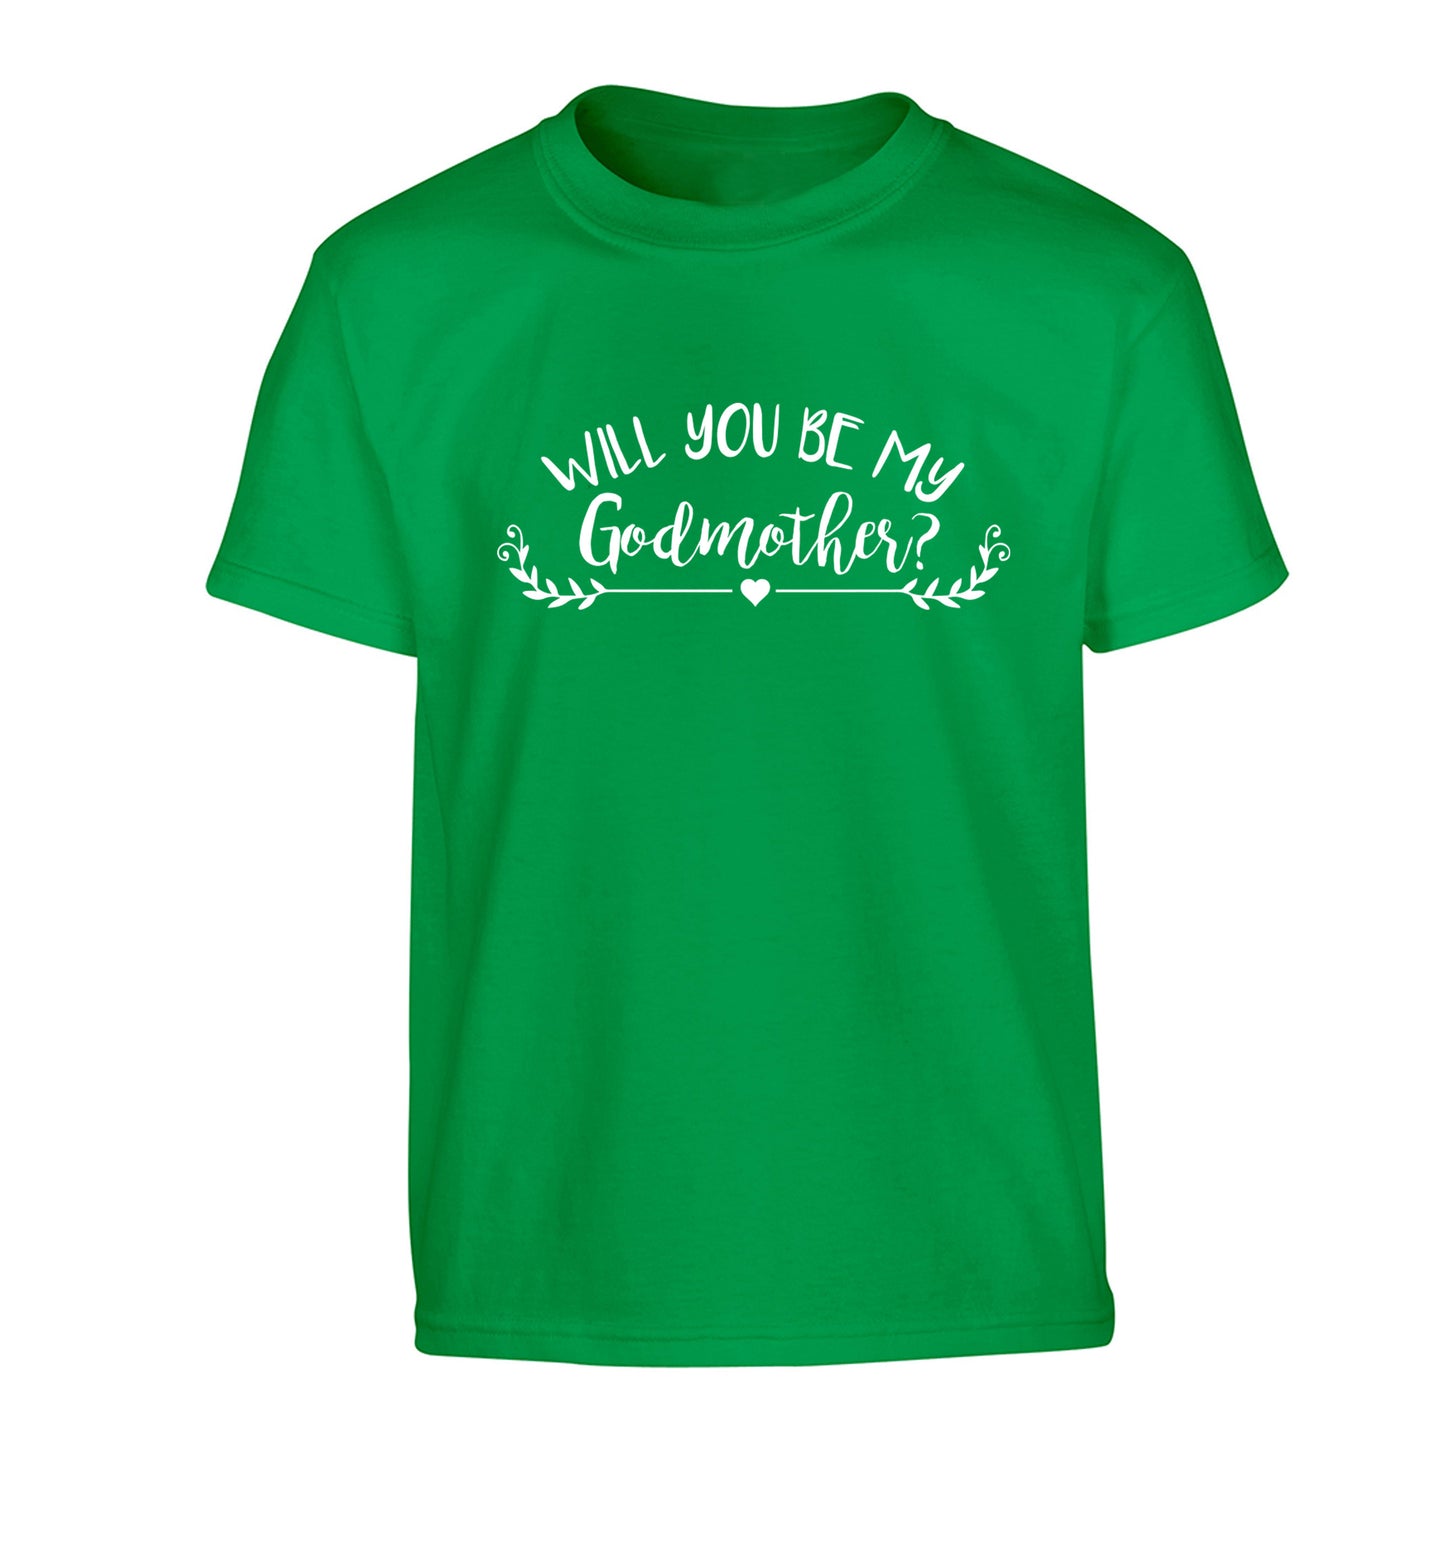 Will you be my godmother? Children's green Tshirt 12-14 Years